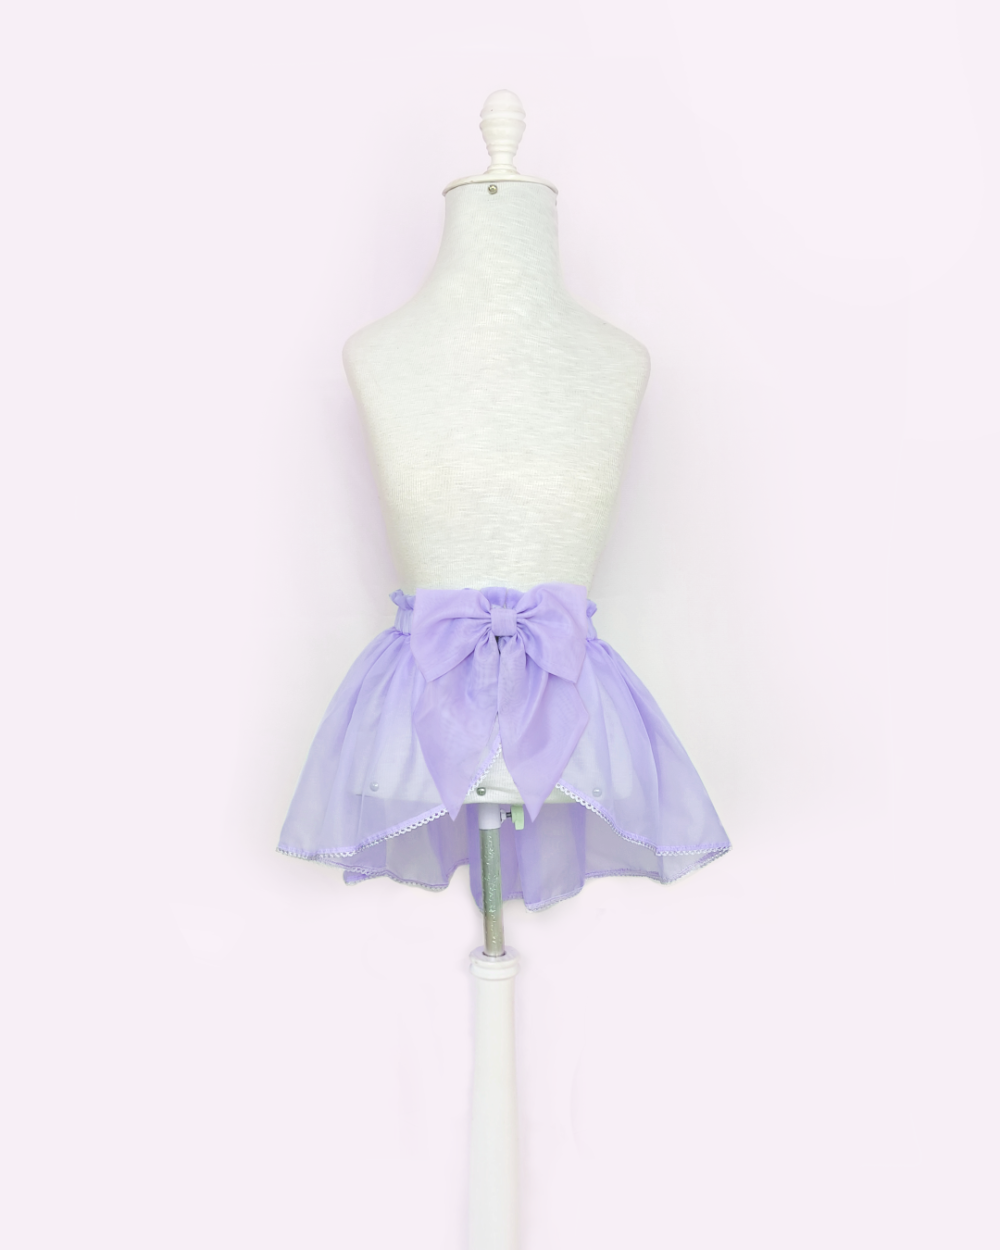 Overskirt lavender made of voile, viscose lace and a detachable bow.